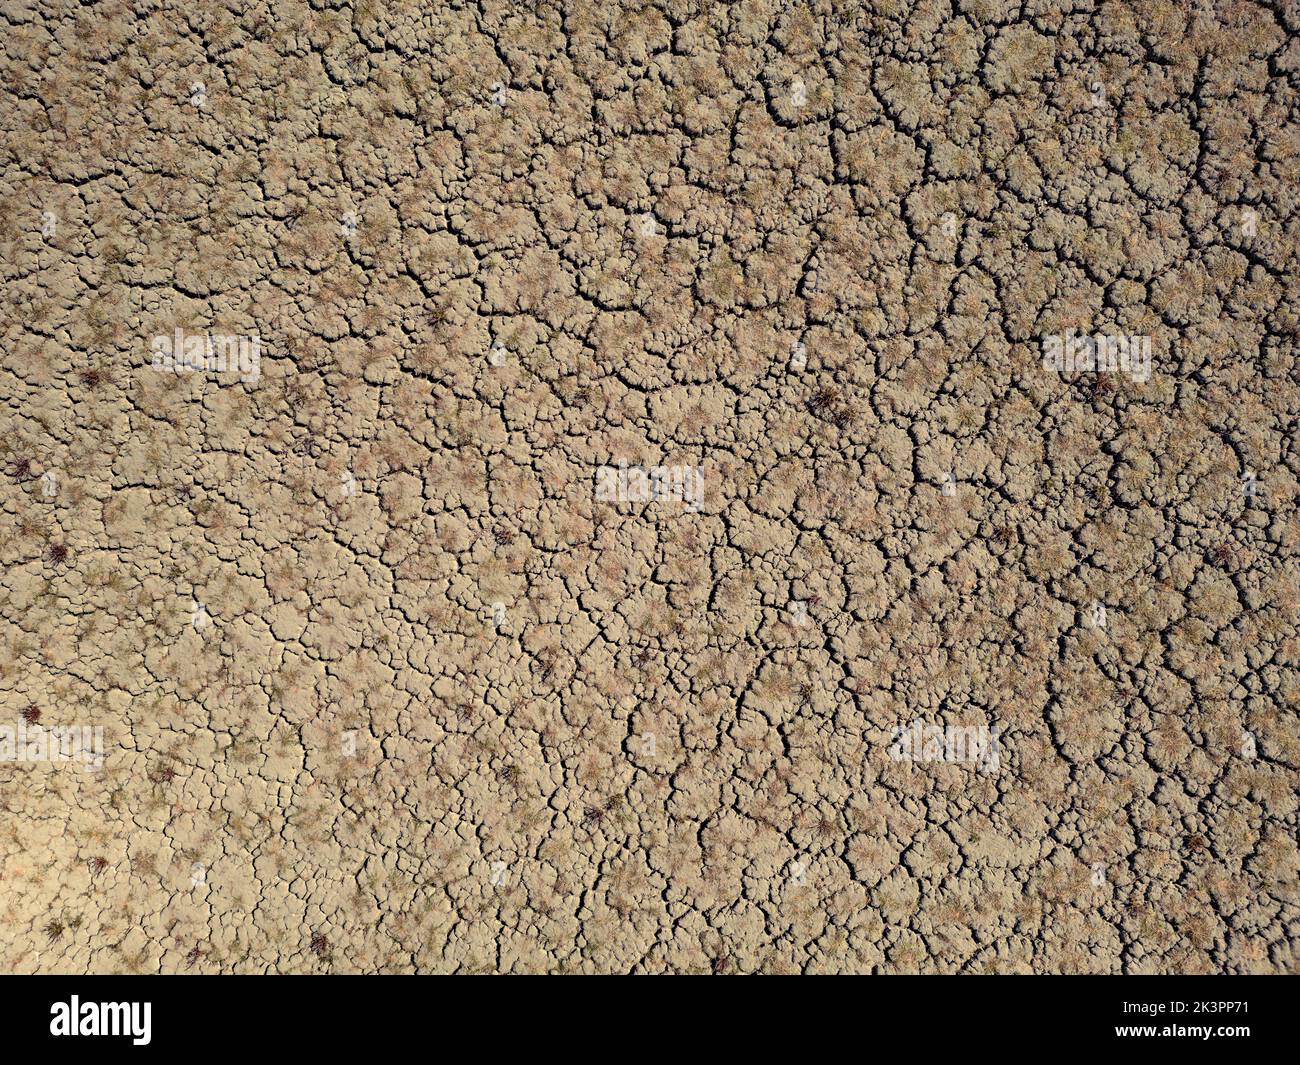 Dry and cracked lake bed due to global warming and drought Stock Photo